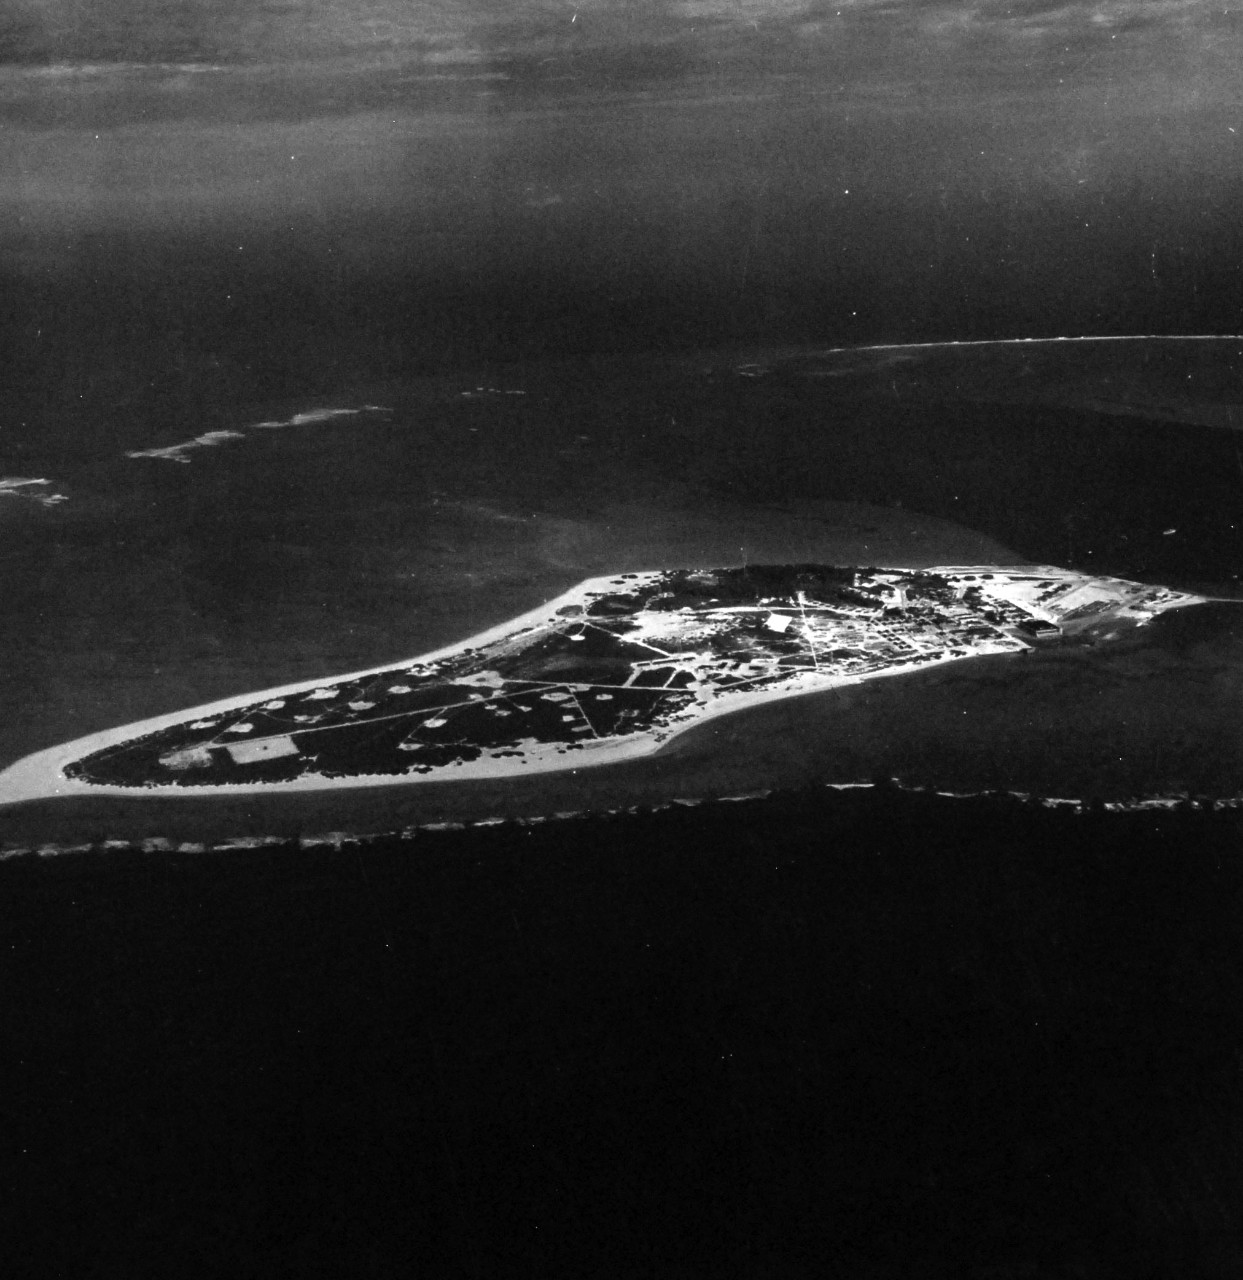 80-G-451088:  Midway Islands, November 1941:    Sand Island, looking North West.  Note airfield on Sand.  Photographed by Wolf, November 24, 1941.  U.S. Navy photograph, now in the collections of the National Archives.    (2015/11/03).